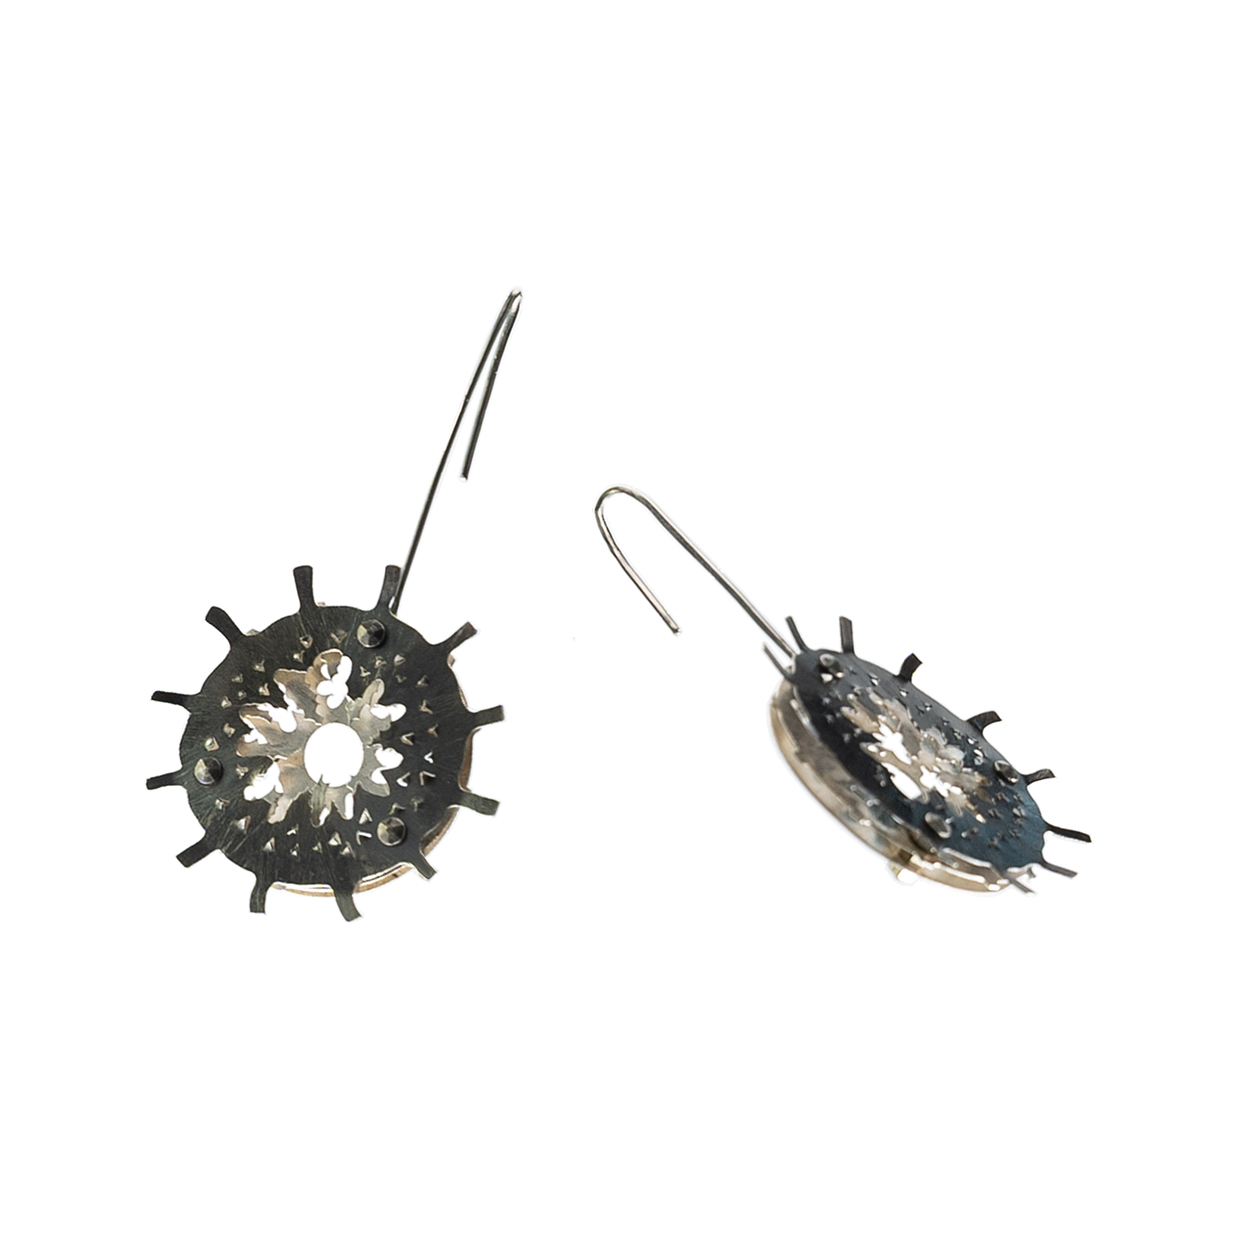 A pair of earrings which consist of 3 layers each. The top layer is laser cut and hand formed and then patinated to create contrast between it and the lower 2 layers. All 3 layers are different designs. The niobium ear wires are angled towards each other in the photo.